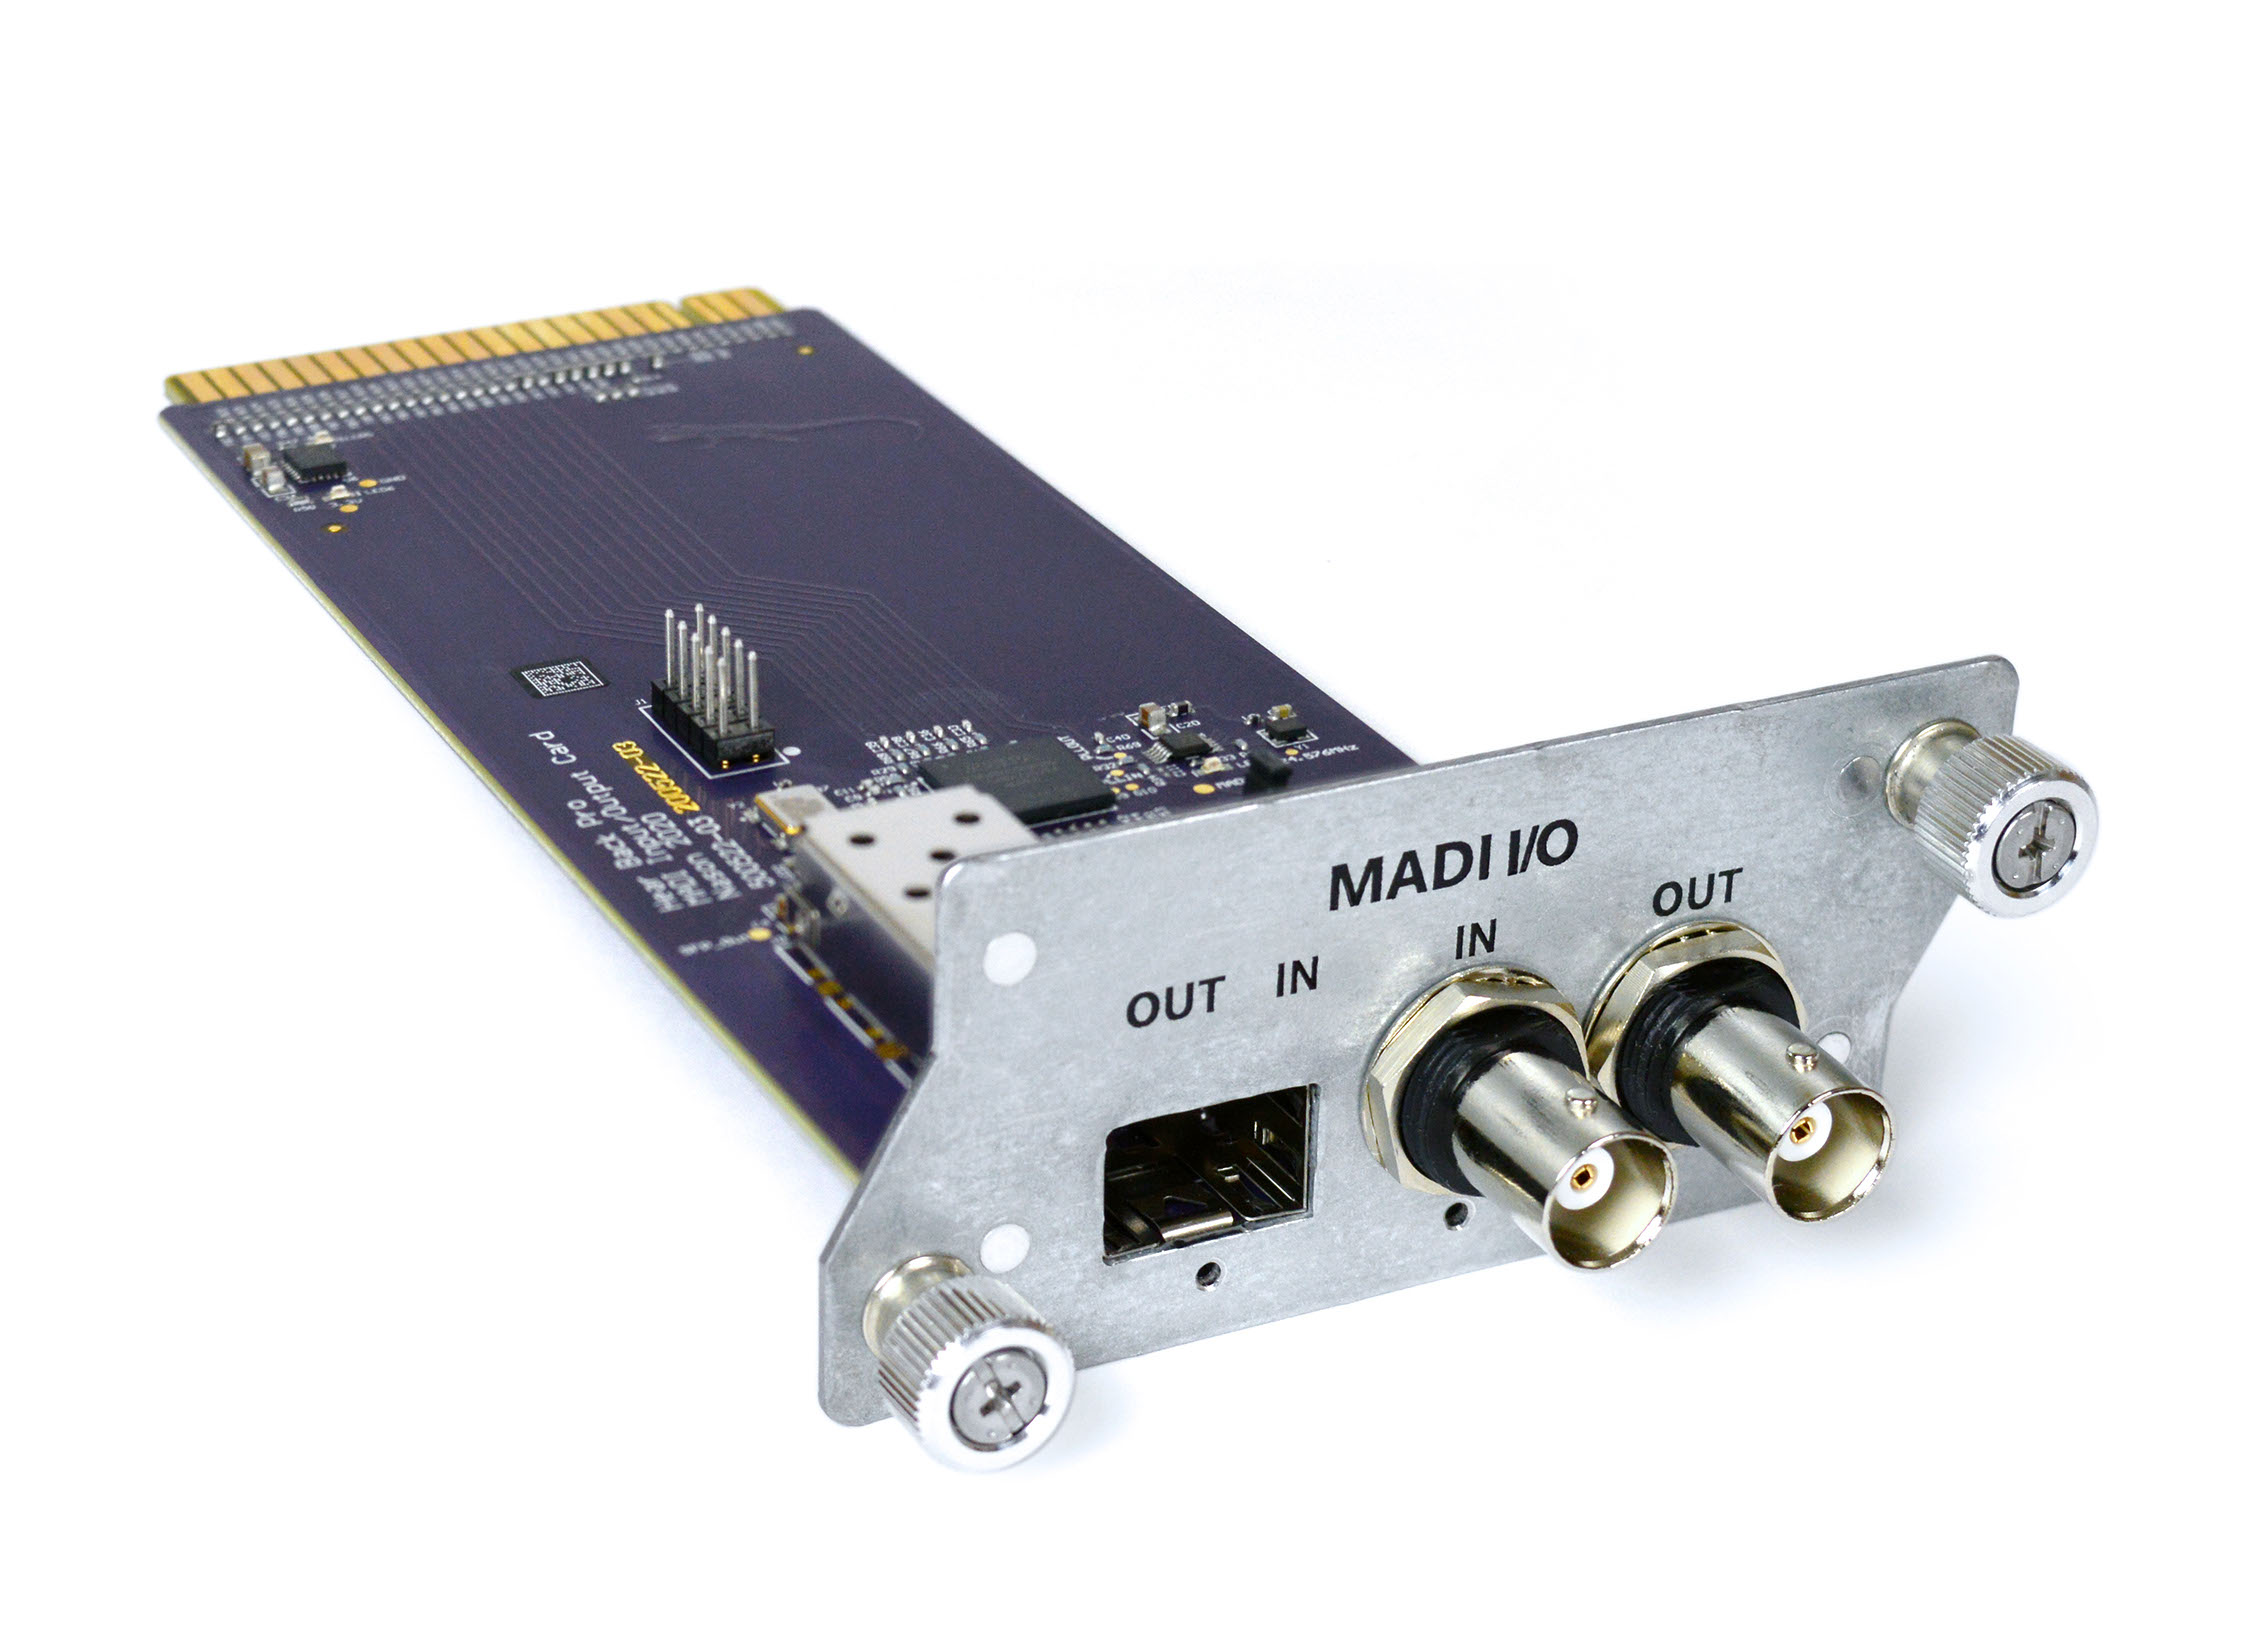 A stand-alone MADI interface card for a Hear Back PRO on a white background.